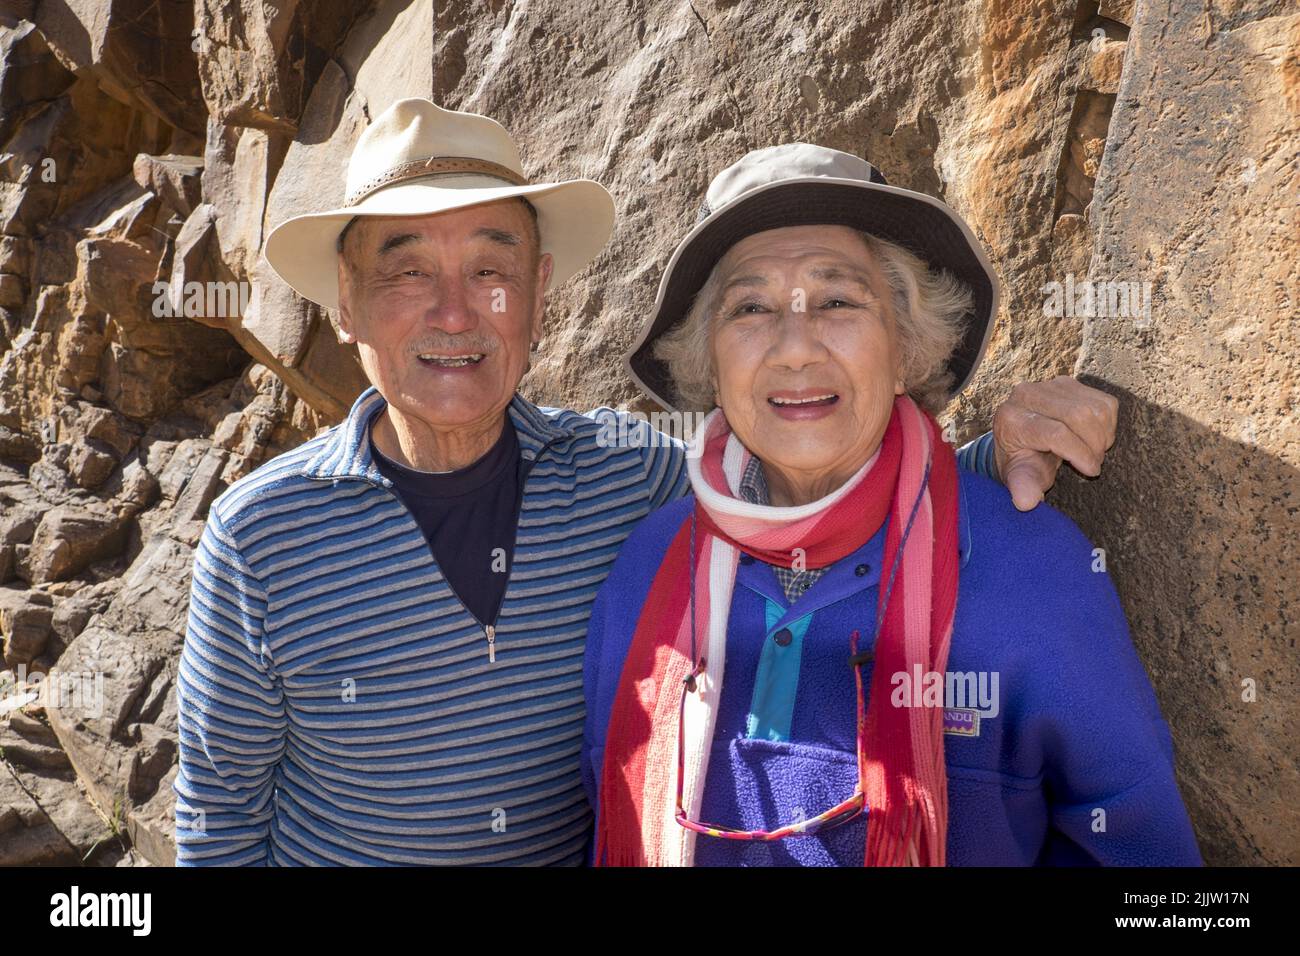 Australian born Chinese, self-funded, traveling retirees, Maurice Lee (86) and his wife, Wilma Lee (83), touring the Sacred Canyon in the Flinders Ranges, in South Australia. Both Maurice and Wilma active seniors, only gave up skiing a few years ago. Now they are travelling to fill their bucket list of places they've always wished to visit in Australia. They are about to celebrate their 62nd wedding anniversary.  Photo shows Maurice and Wilma, with one of the Aboriginal petraglyphs in the Sacred Canyon whish is near Wilpena Pound. Stock Photo